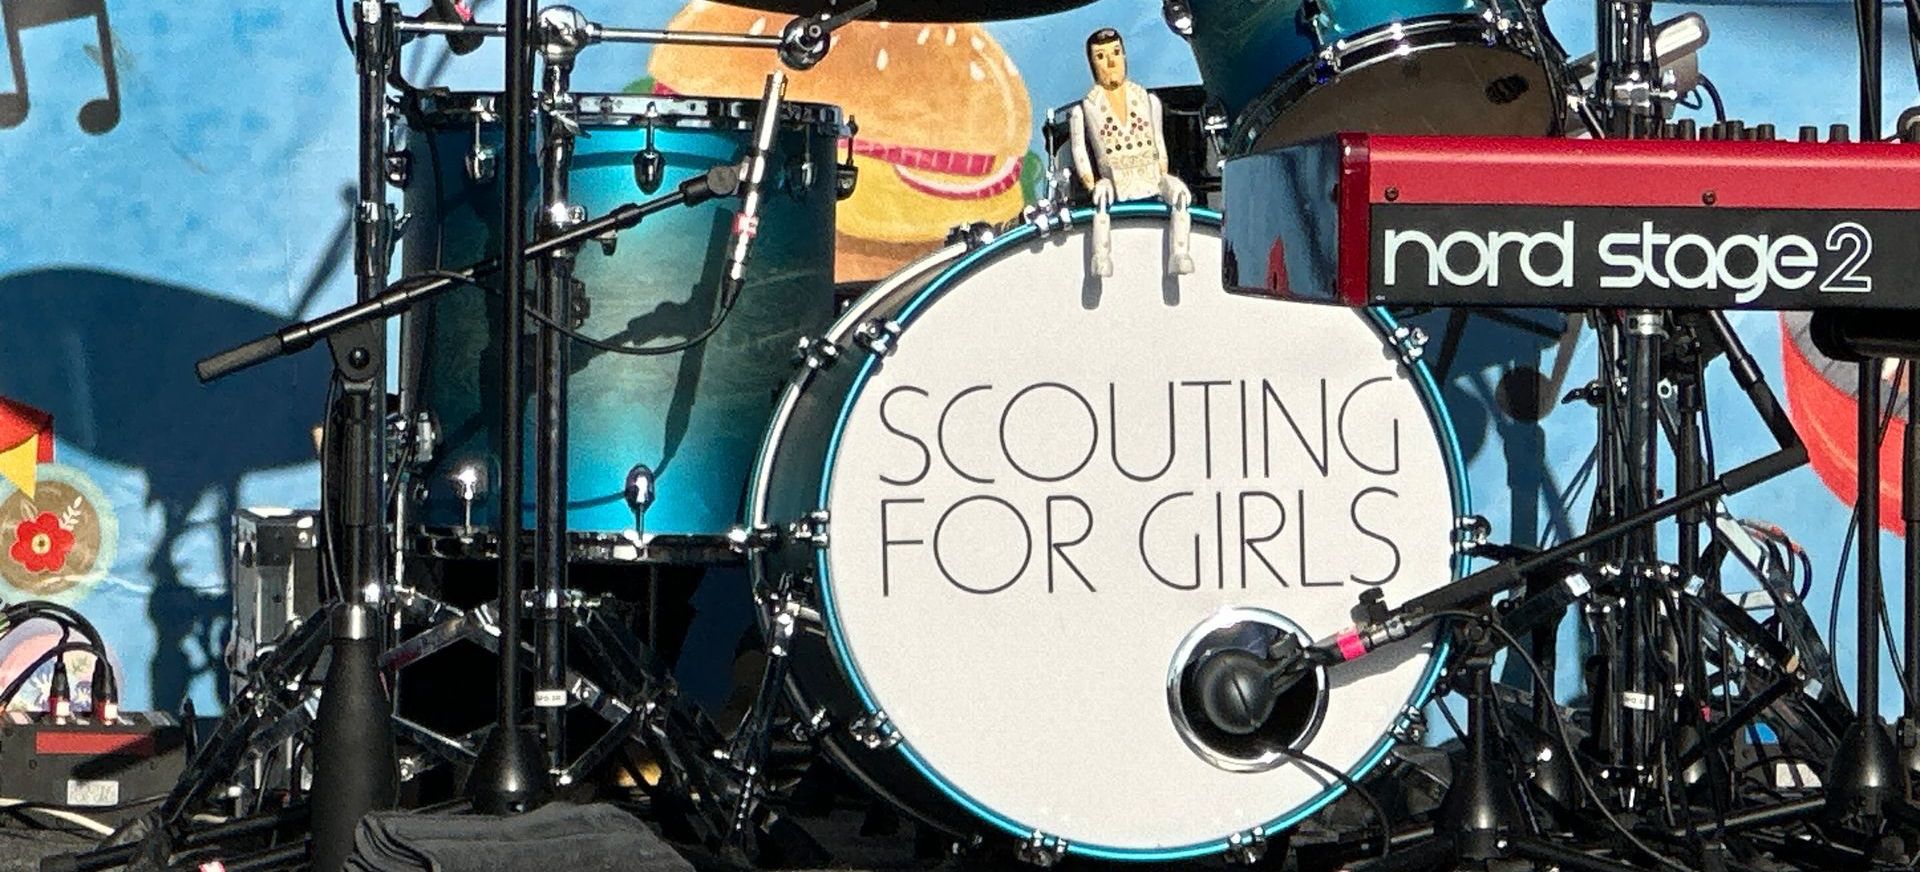 A close up of a drum kit with Scouting For Girls printed on the bass drum.